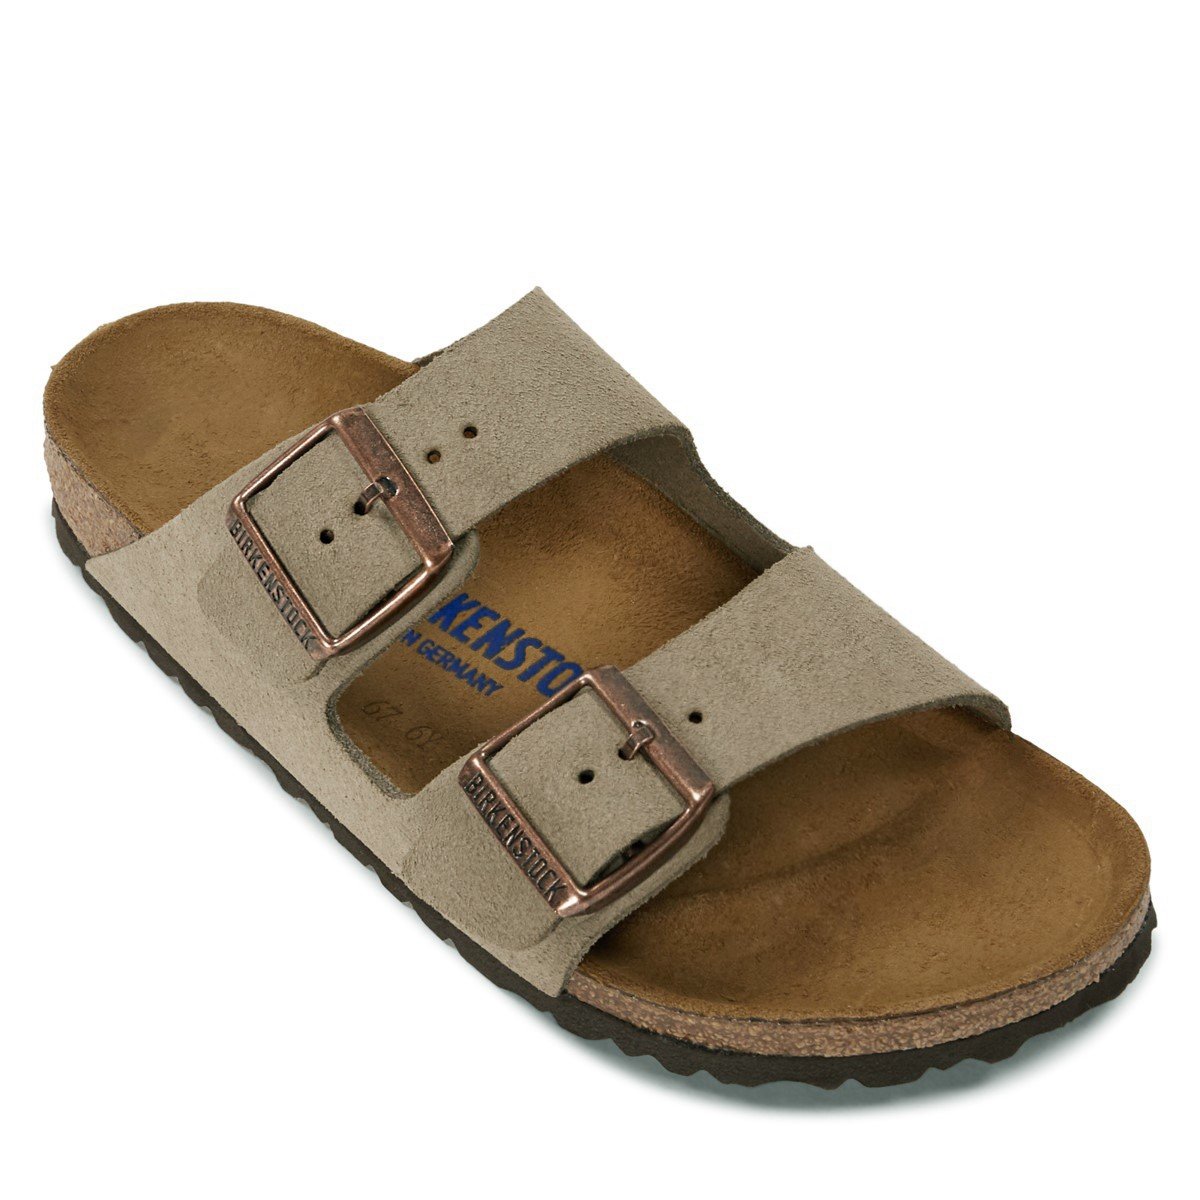 Women's Arizona Soft Footbed Sandals in Taupe